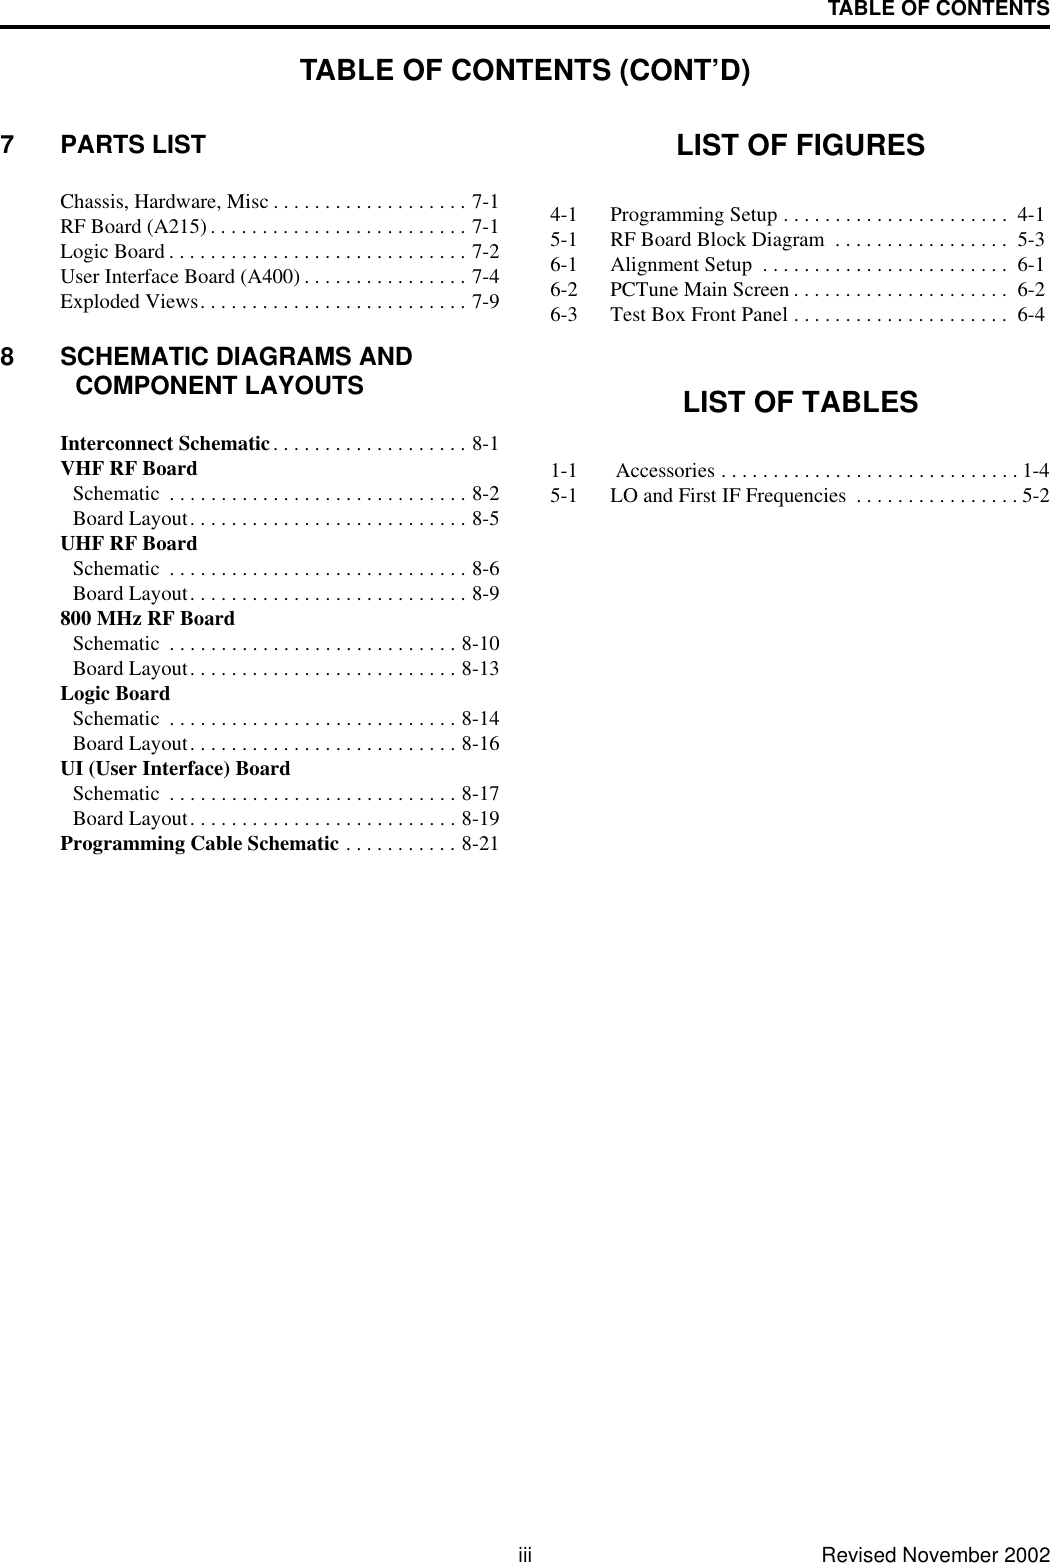 TABLE OF CONTENTS (CONT’D)iii Revised November 2002TABLE OF CONTENTS7 PARTS LISTChassis, Hardware, Misc . . . . . . . . . . . . . . . . . . . 7-1RF Board (A215) . . . . . . . . . . . . . . . . . . . . . . . . . 7-1Logic Board . . . . . . . . . . . . . . . . . . . . . . . . . . . . . 7-2User Interface Board (A400) . . . . . . . . . . . . . . . . 7-4Exploded Views. . . . . . . . . . . . . . . . . . . . . . . . . . 7-98 SCHEMATIC DIAGRAMS AND COMPONENT LAYOUTSInterconnect Schematic. . . . . . . . . . . . . . . . . . . 8-1VHF RF BoardSchematic  . . . . . . . . . . . . . . . . . . . . . . . . . . . . . 8-2Board Layout. . . . . . . . . . . . . . . . . . . . . . . . . . . 8-5UHF RF BoardSchematic  . . . . . . . . . . . . . . . . . . . . . . . . . . . . . 8-6Board Layout. . . . . . . . . . . . . . . . . . . . . . . . . . . 8-9800 MHz RF BoardSchematic  . . . . . . . . . . . . . . . . . . . . . . . . . . . . 8-10Board Layout. . . . . . . . . . . . . . . . . . . . . . . . . . 8-13Logic BoardSchematic  . . . . . . . . . . . . . . . . . . . . . . . . . . . . 8-14Board Layout. . . . . . . . . . . . . . . . . . . . . . . . . . 8-16UI (User Interface) BoardSchematic  . . . . . . . . . . . . . . . . . . . . . . . . . . . . 8-17Board Layout. . . . . . . . . . . . . . . . . . . . . . . . . . 8-19Programming Cable Schematic . . . . . . . . . . . 8-21LIST OF FIGURES4-1 Programming Setup . . . . . . . . . . . . . . . . . . . . . .  4-15-1 RF Board Block Diagram  . . . . . . . . . . . . . . . . .  5-36-1 Alignment Setup  . . . . . . . . . . . . . . . . . . . . . . . .  6-16-2 PCTune Main Screen . . . . . . . . . . . . . . . . . . . . .  6-26-3 Test Box Front Panel . . . . . . . . . . . . . . . . . . . . .  6-4LIST OF TABLES1-1  Accessories . . . . . . . . . . . . . . . . . . . . . . . . . . . . . 1-45-1 LO and First IF Frequencies  . . . . . . . . . . . . . . . . 5-2